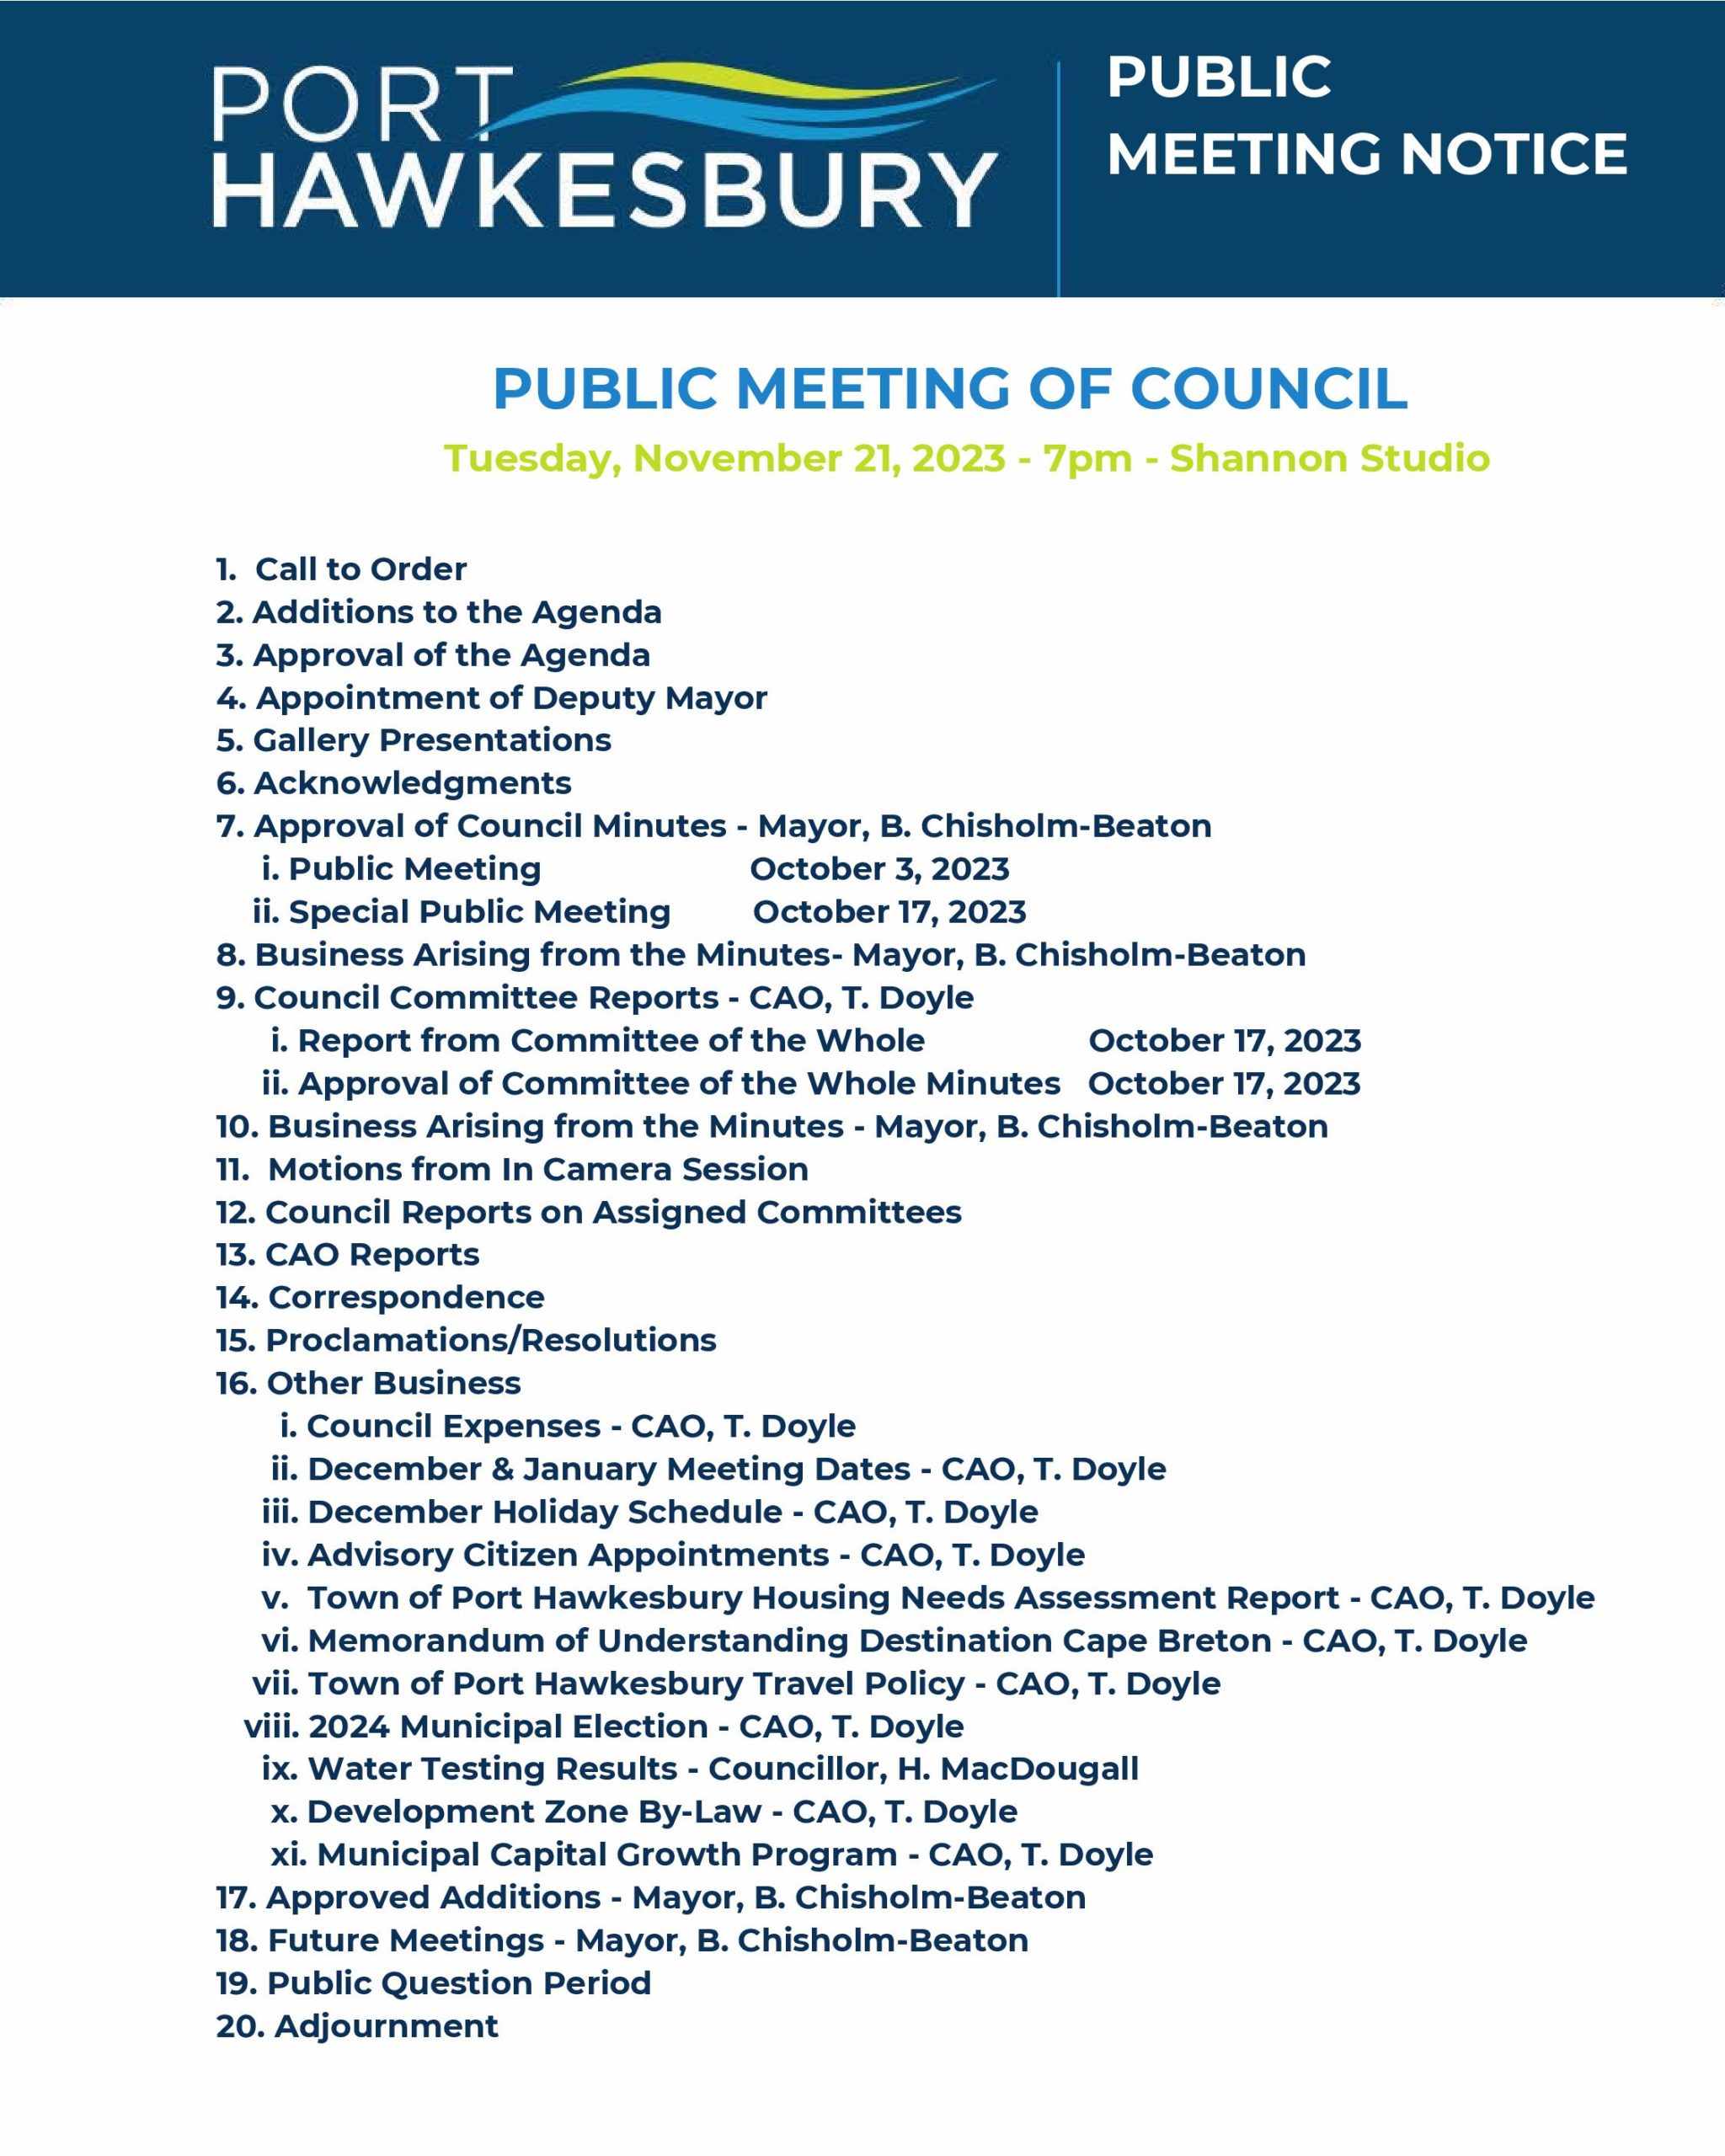 Joint Public Meeting of Council/ Committee of the Whole